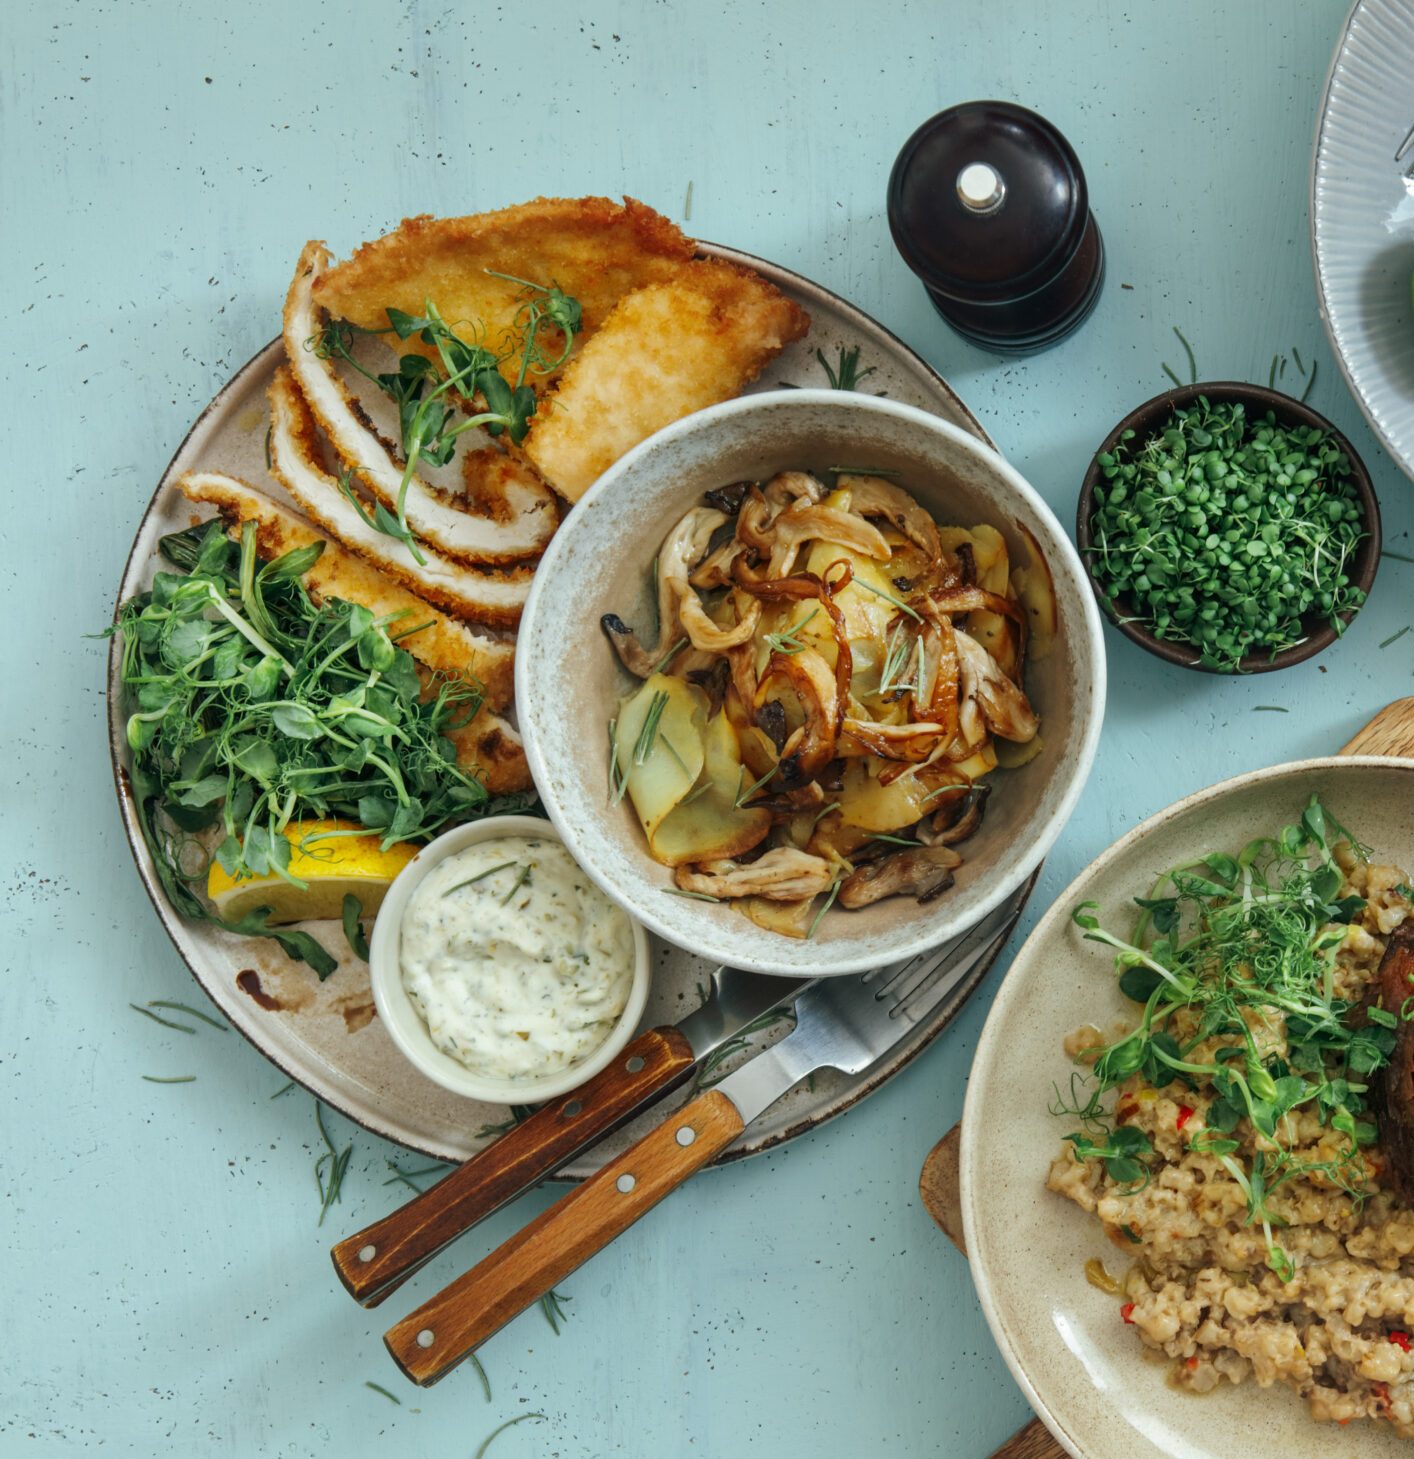 Chicken in a Parmesan and Breadcrumb Crust  served with Crispy Potatoes and Rocket. Beer-braised Beef Cheek with Pearl Barley Risotto. Roasted Pear and Parma Ham Salad with Goats Cheese and Almond Flakes. Salad with Roasted Prawn. Flat lay top-down composition on blue background.